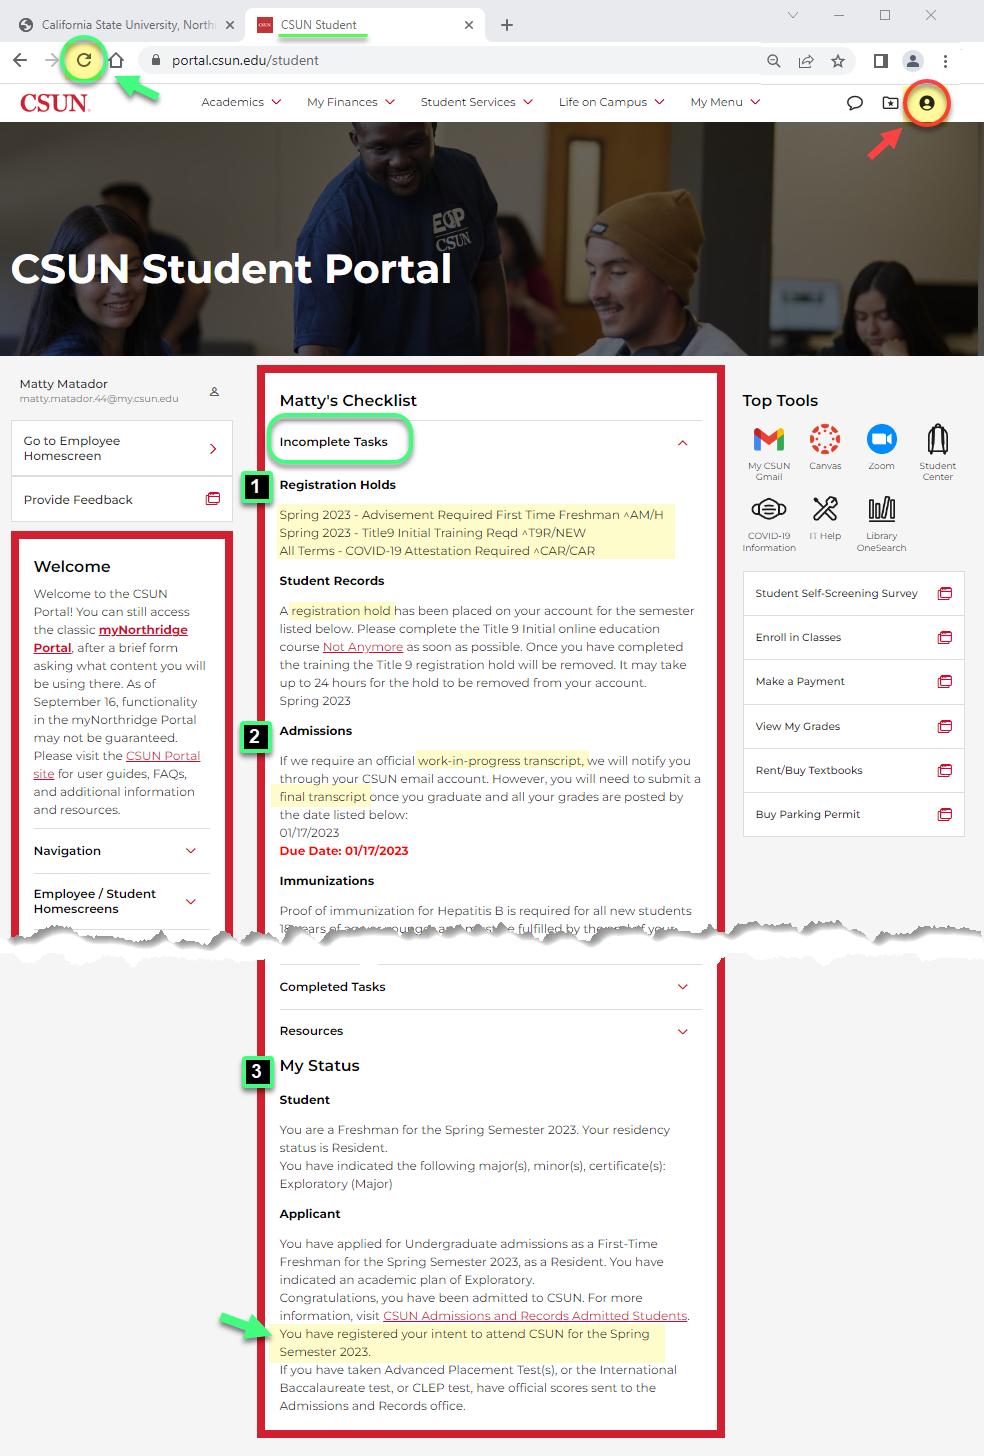 CSUN Portal Checklist Incomplete Tasks section with items yet to complete